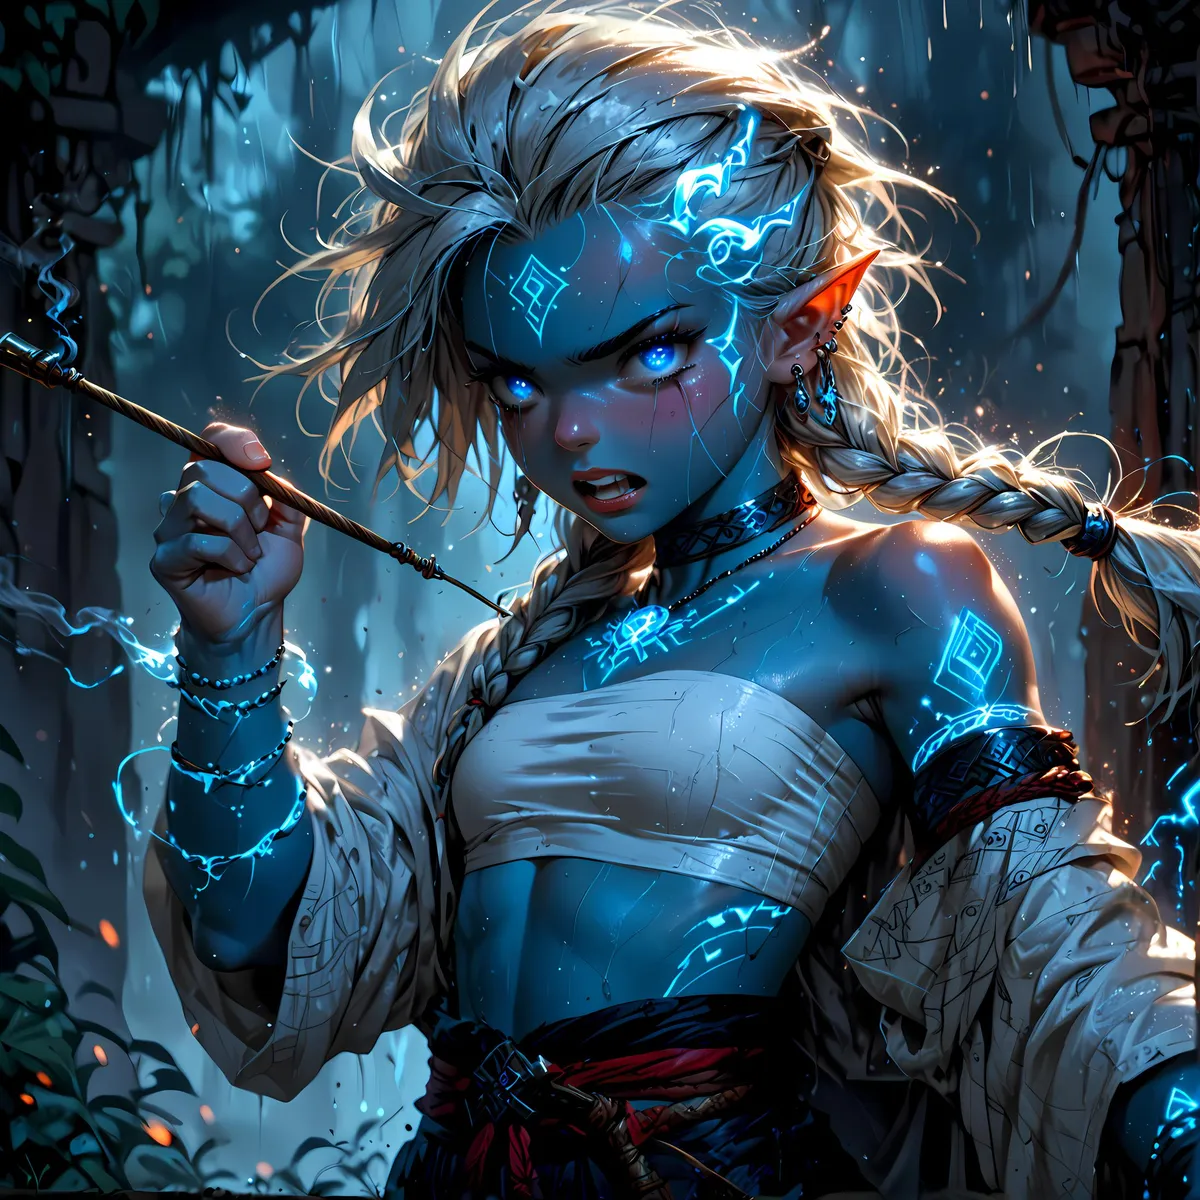 AI-generated image of a blue-skinned elf with glowing tattoos, wielding a staff, created using Stable Diffusion.